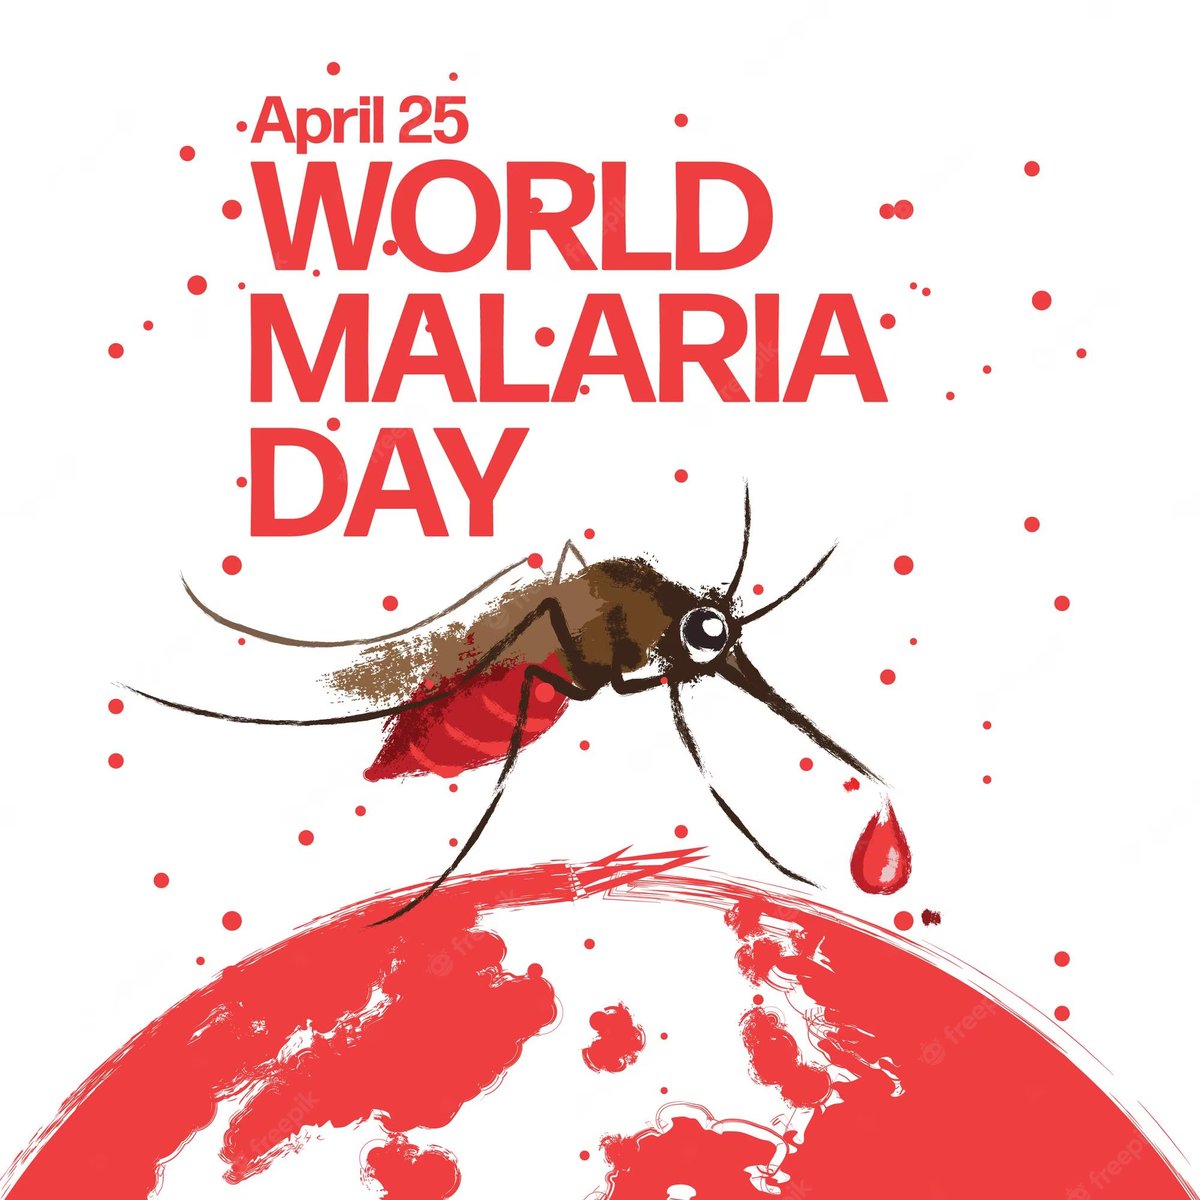 World Malaria Day must inform us that it is possible to wipe out Malaria from every country if we sincerely invest in global health measures that deliver results on the ground. In 2023, no one must die of Malaria. Zero Malaria now. 
#malaria #Malariaday #chdgroup #eciph